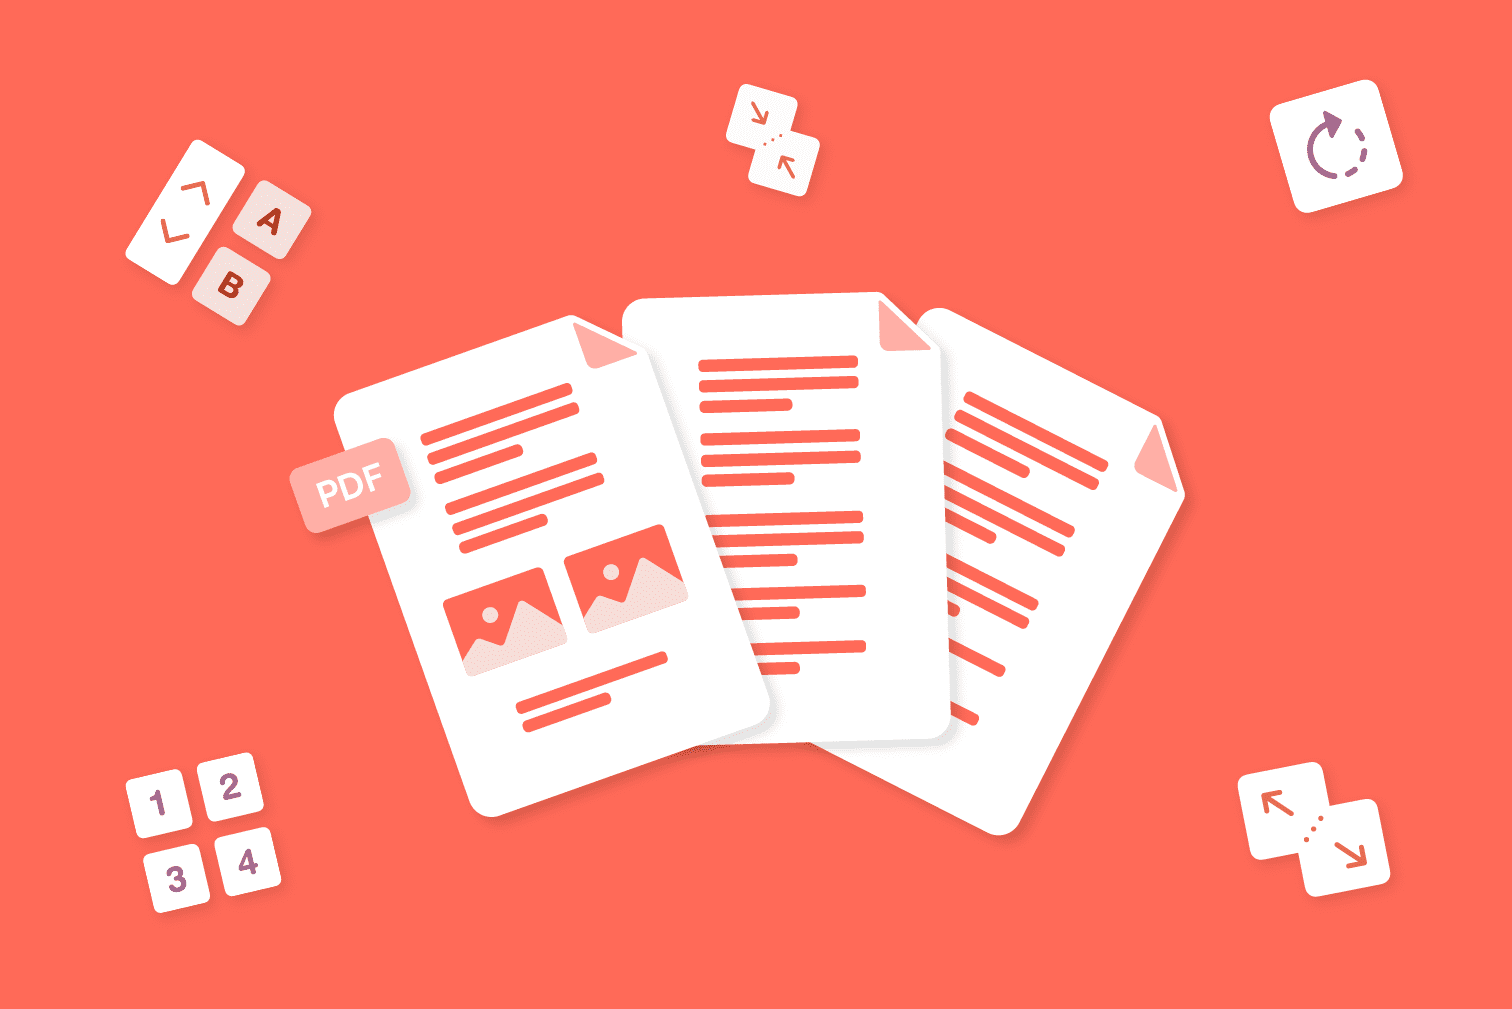 The ultimate guide to merging, splitting, and organizing your PDFs